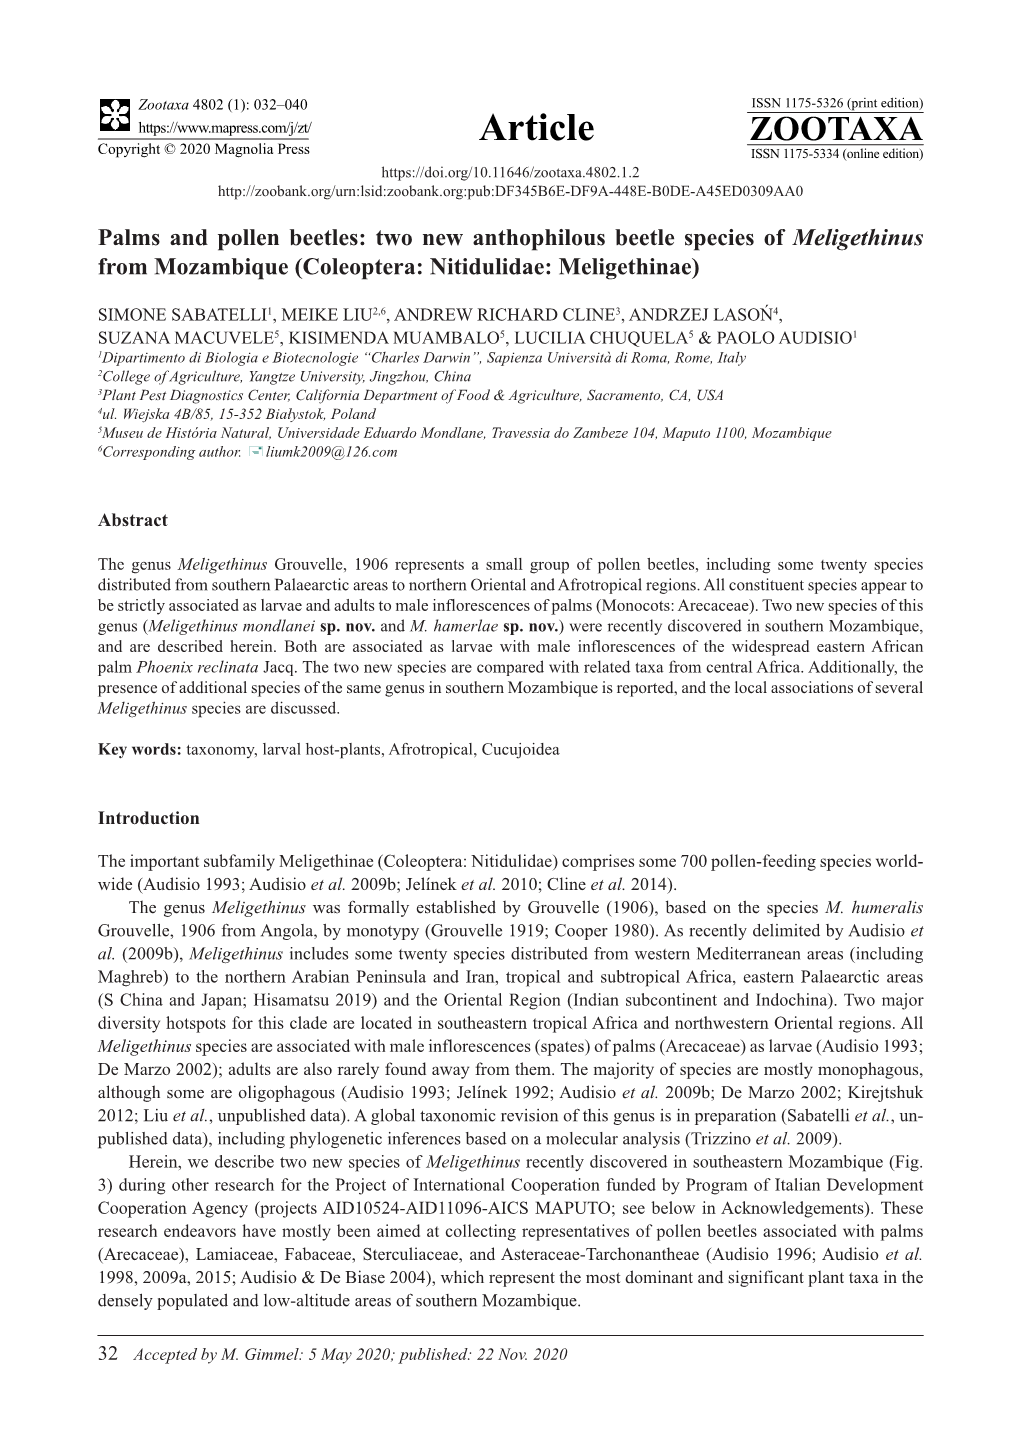 Palms and Pollen Beetles: Two New Anthophilous Beetle Species of Meligethinus from Mozambique (Coleoptera: Nitidulidae: Meligethinae)